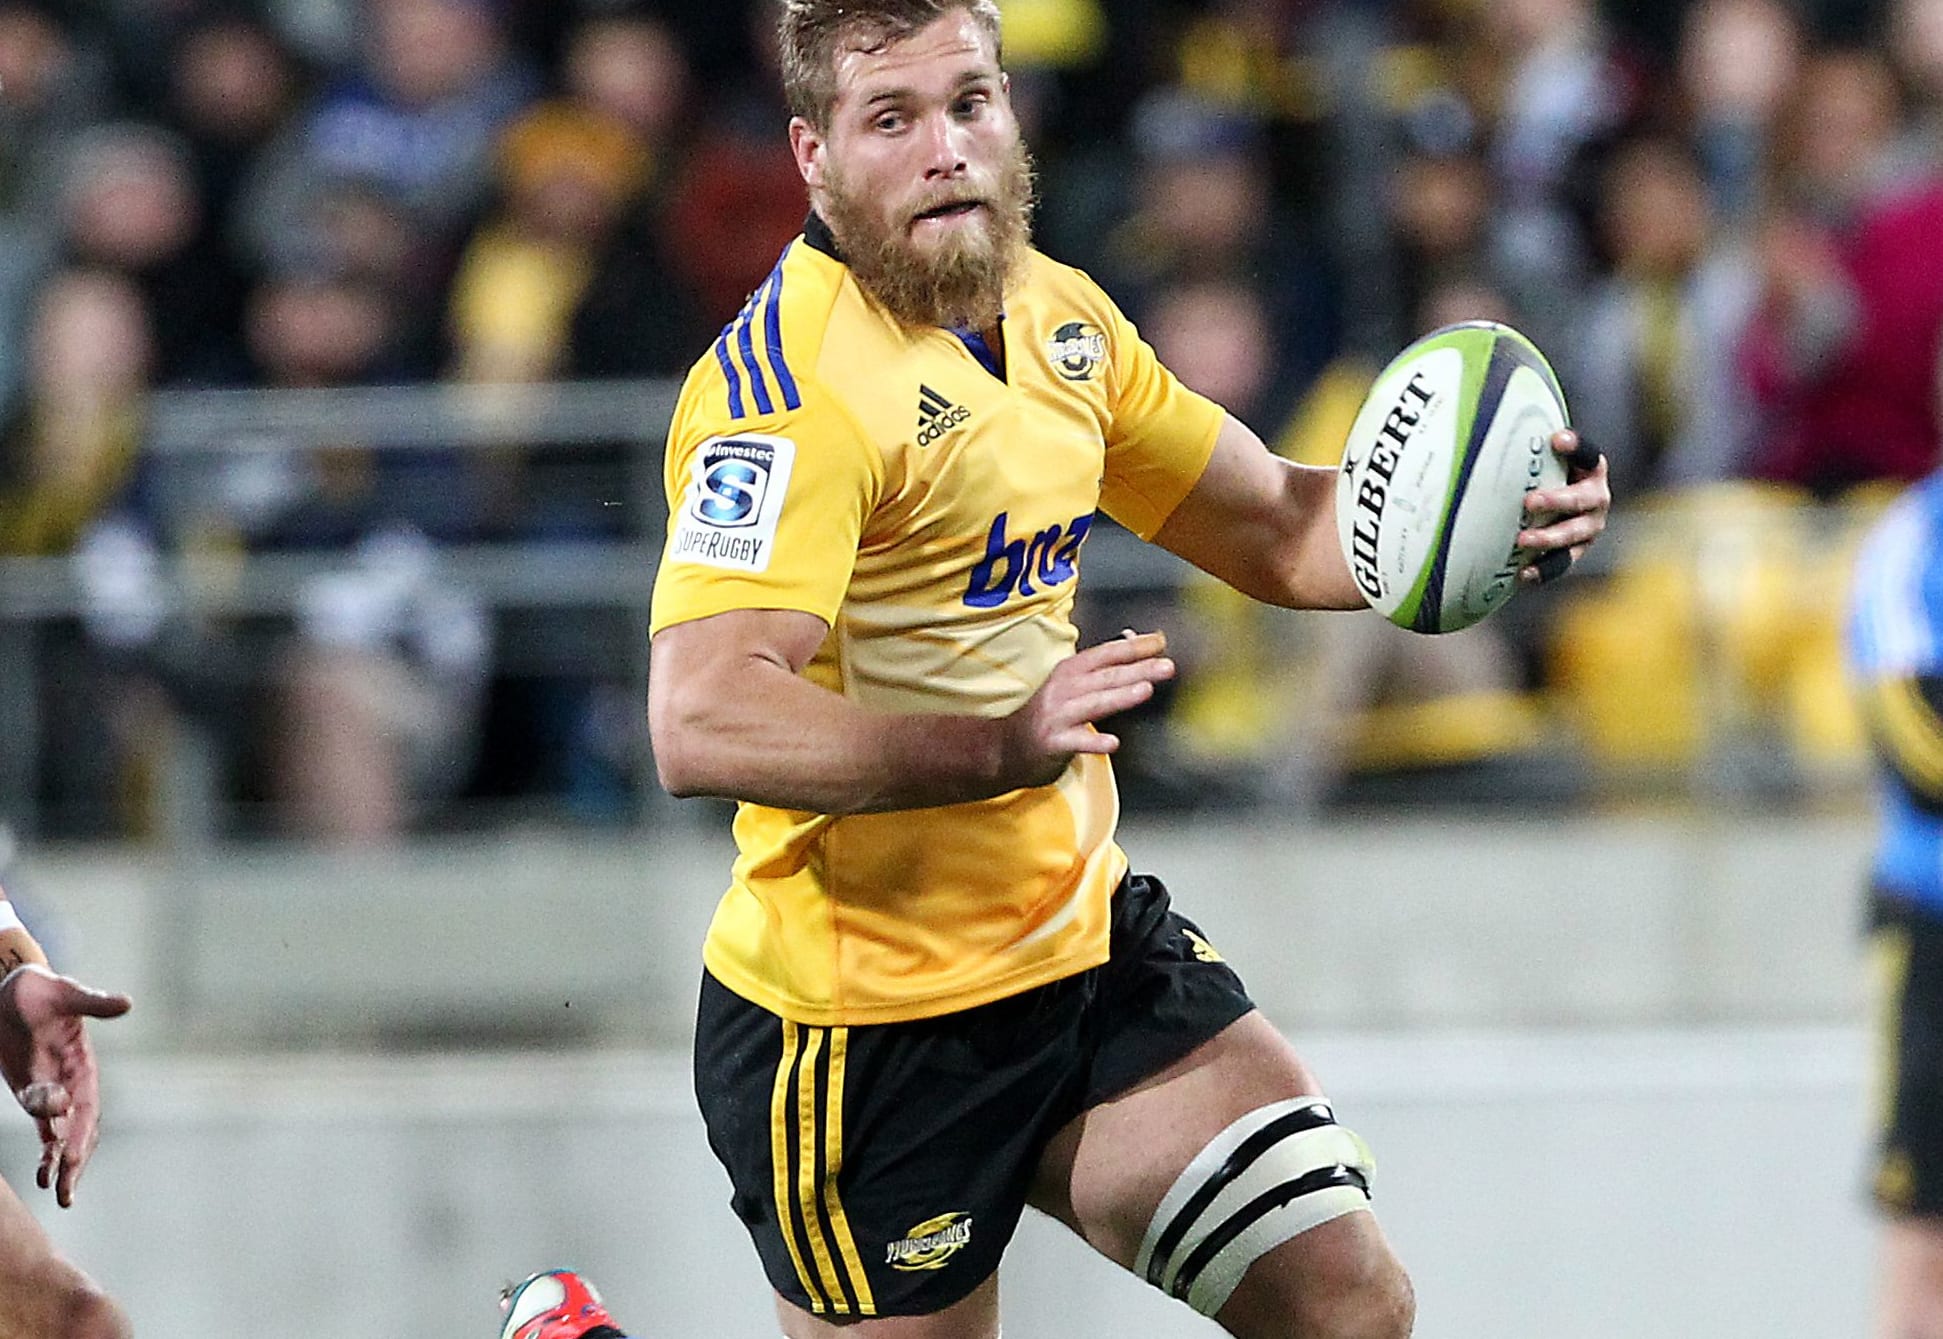 Hurricanes' Brad Shields carries the ball in one hand during the Super Rugby Semi Final, Hurricanes v Brumbies.